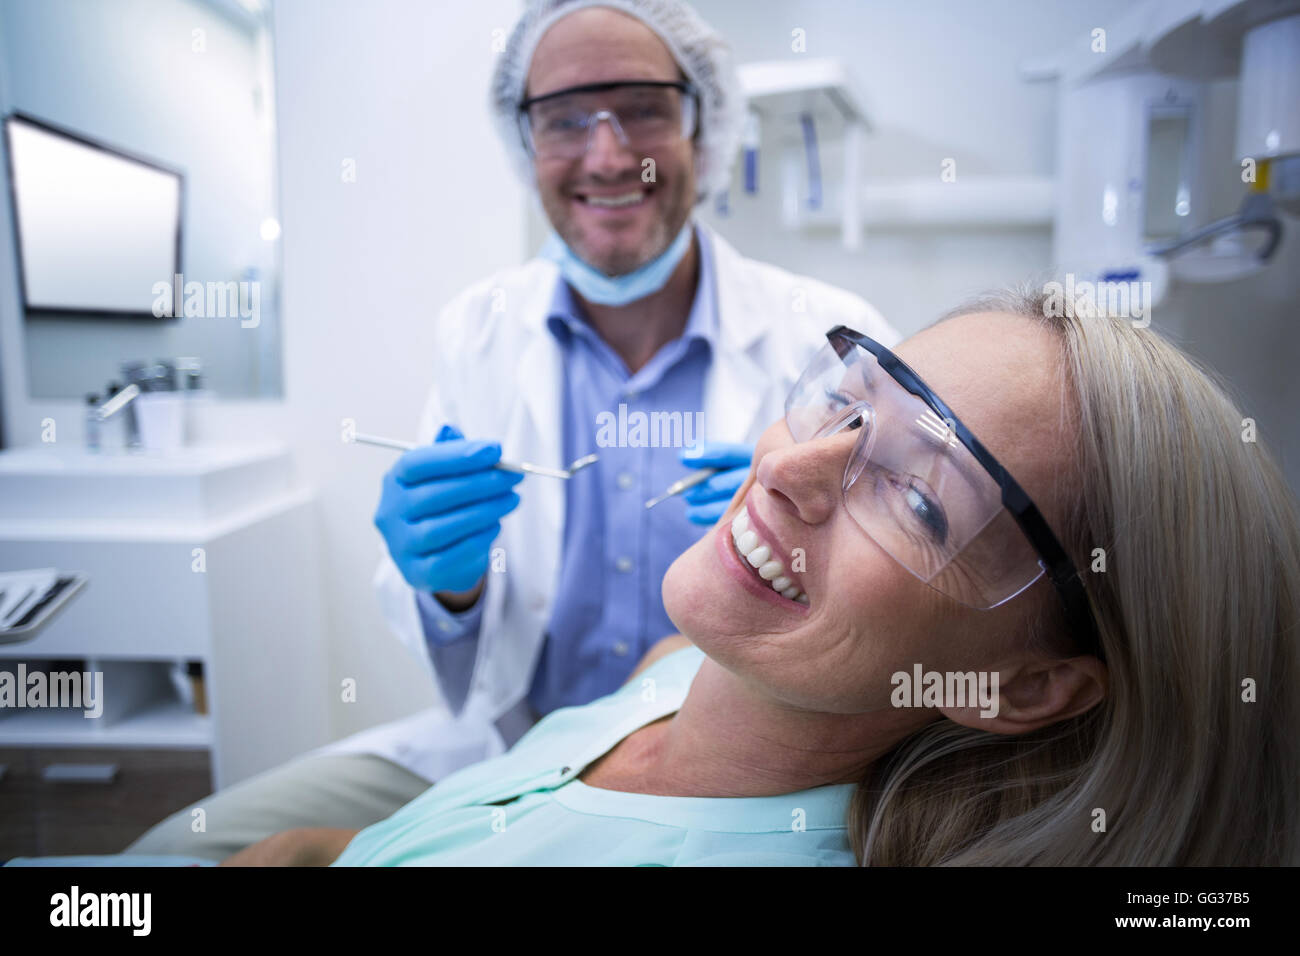 Female patient smiling while getting treatment Stock Photo